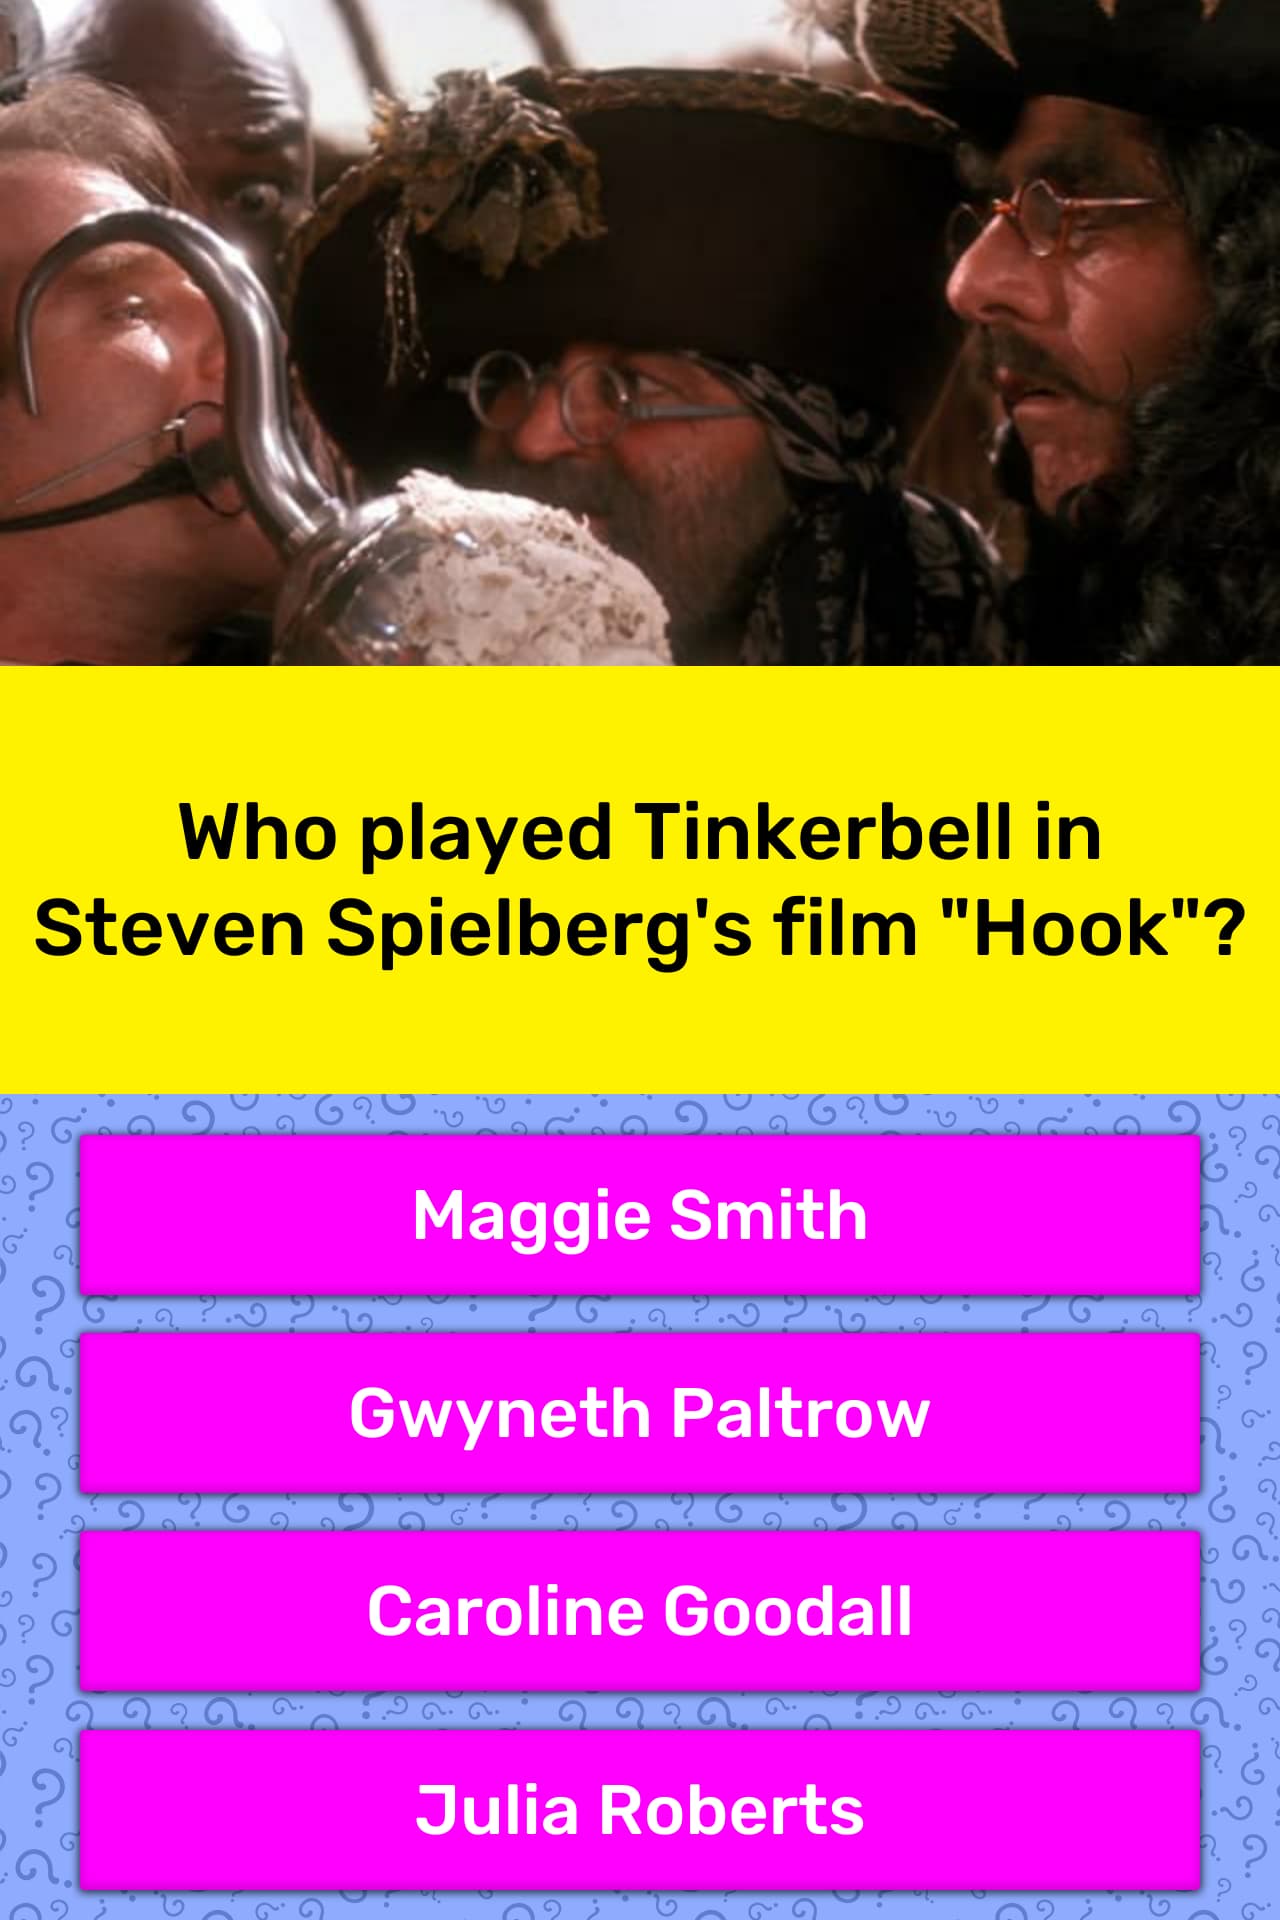 who played hook